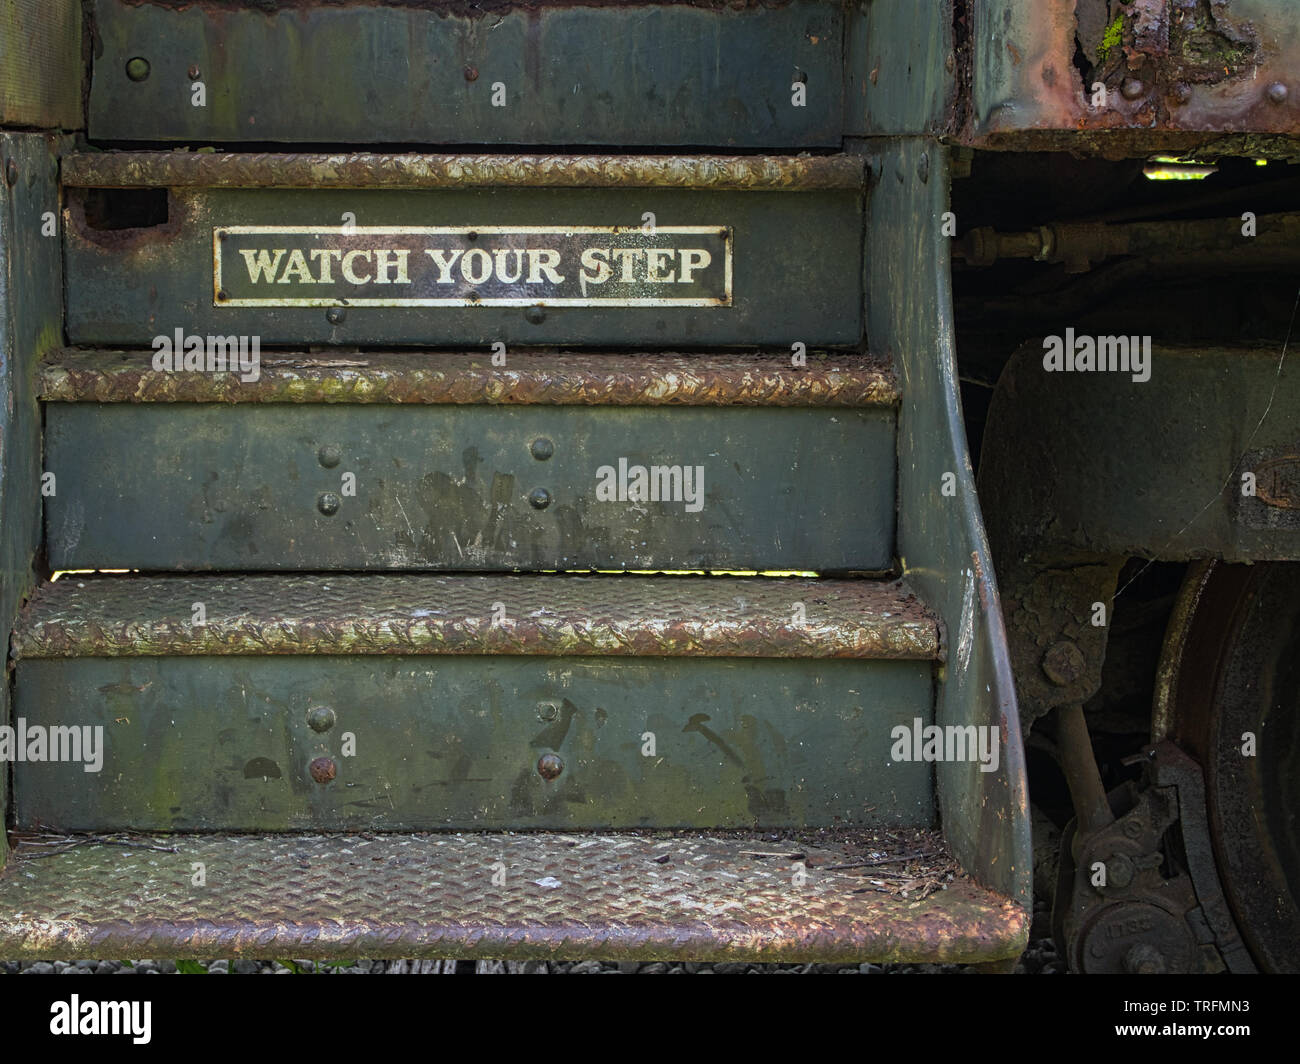 steps into a passenger railway car with a watch your step warning sign Stock Photo